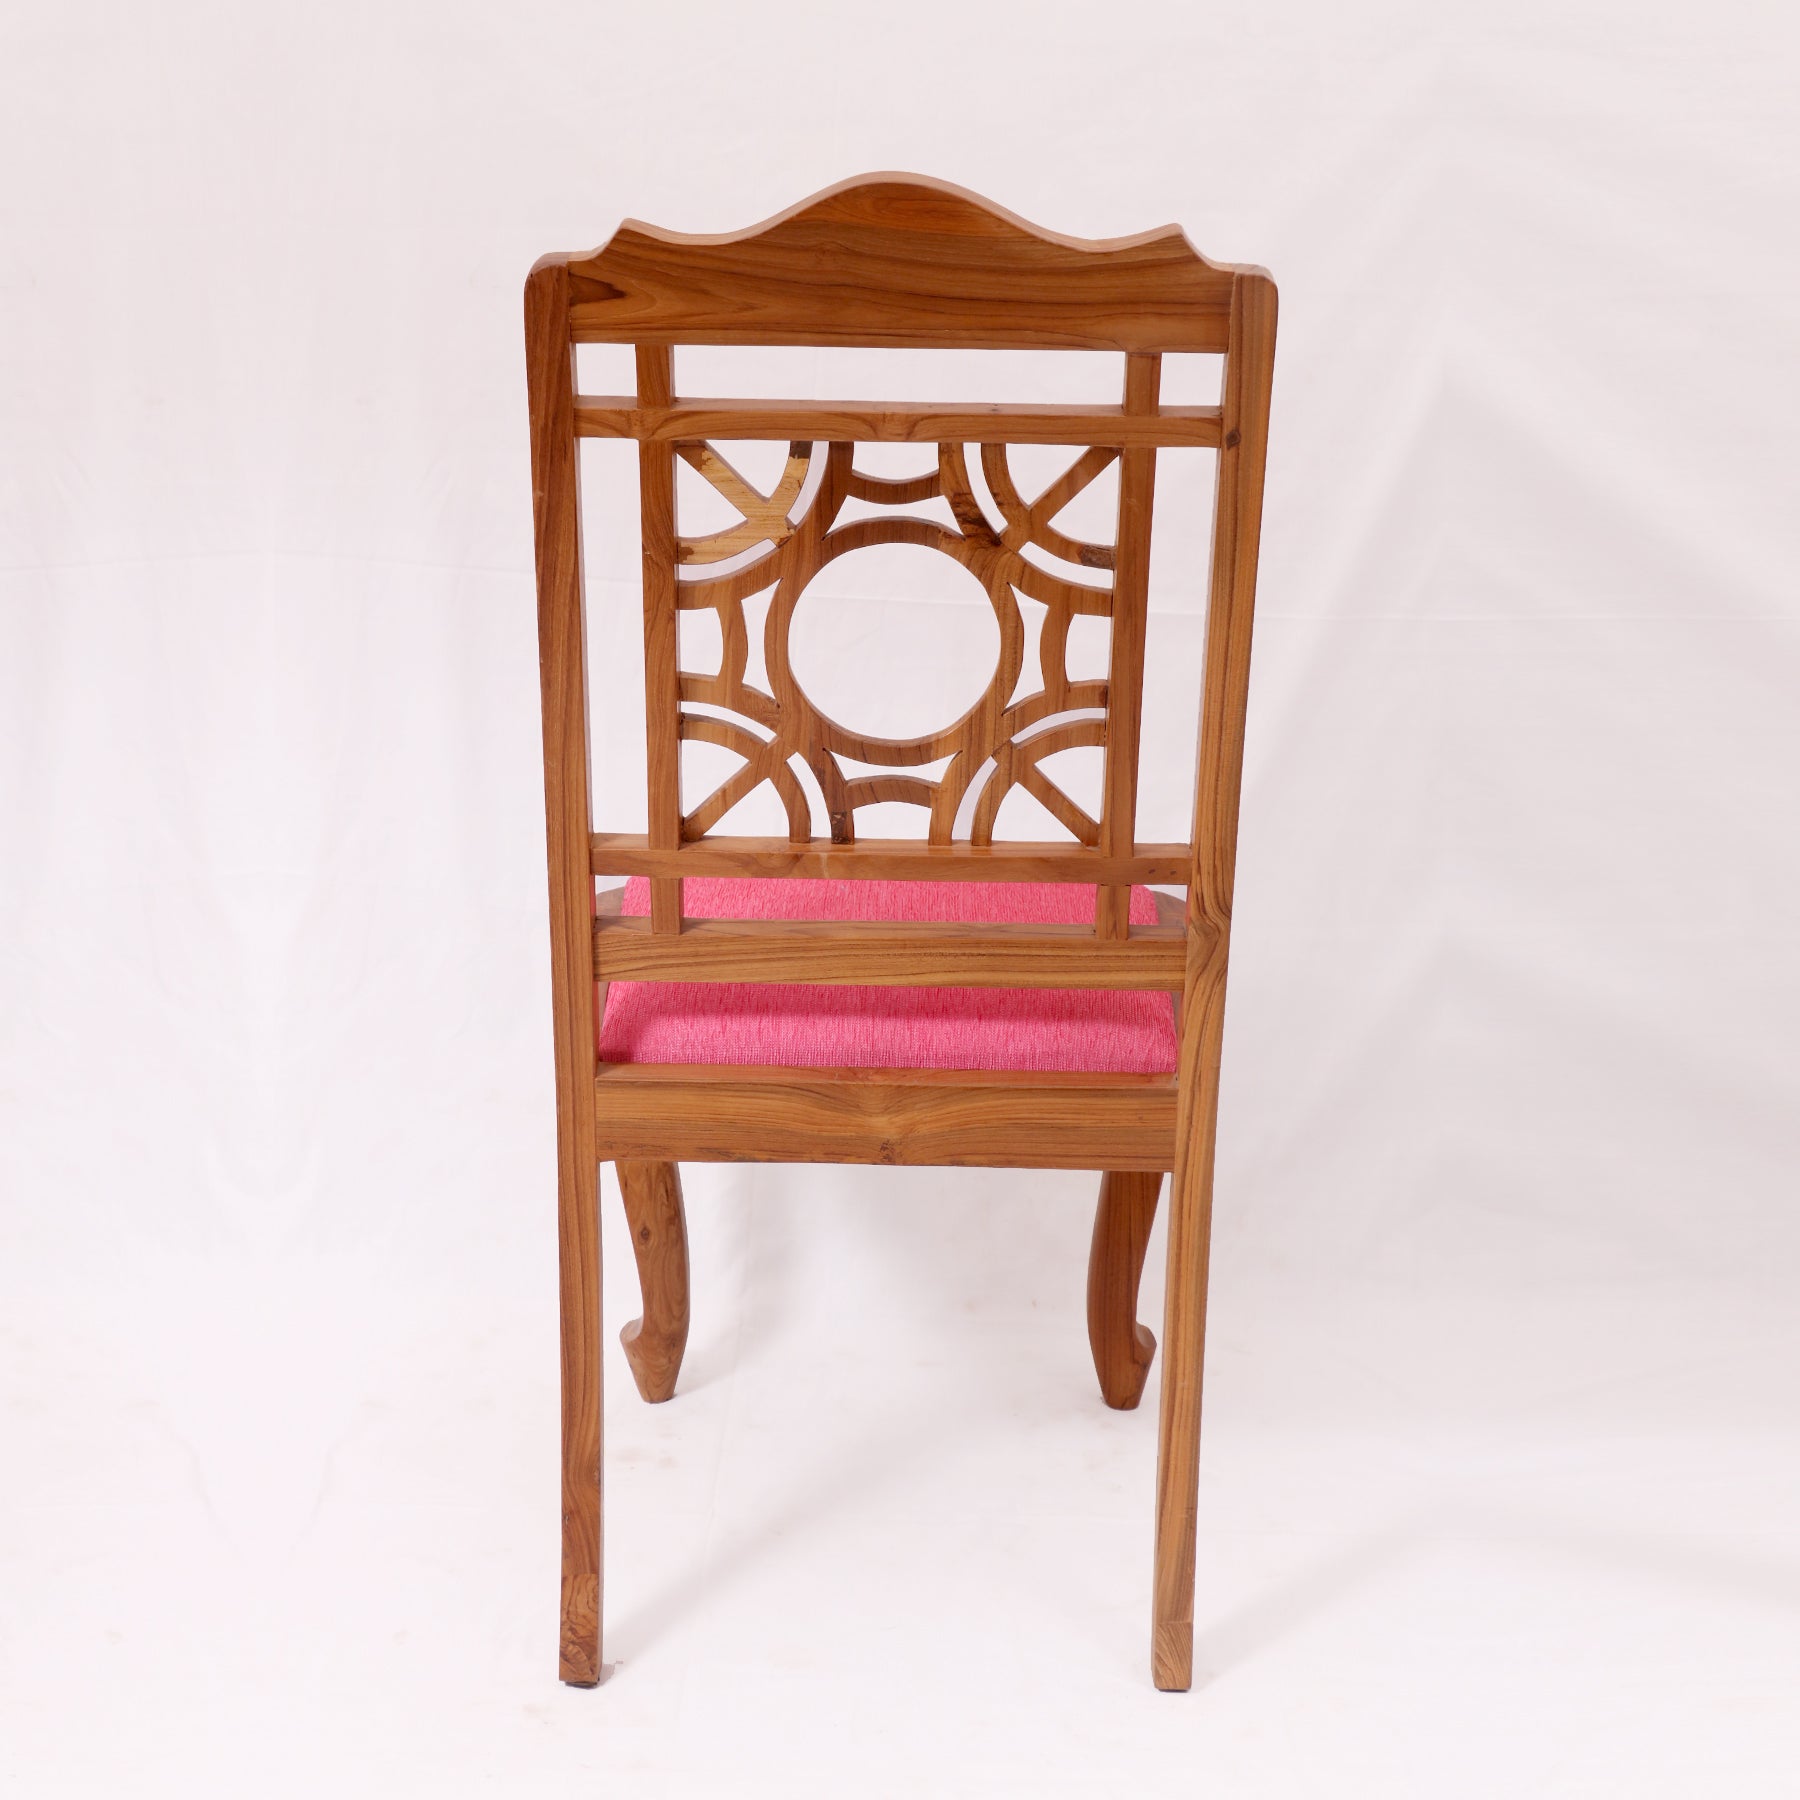 (Set of 2) Teak Wood Traditional Dinning office all purpose Chair pink color Dining Chair